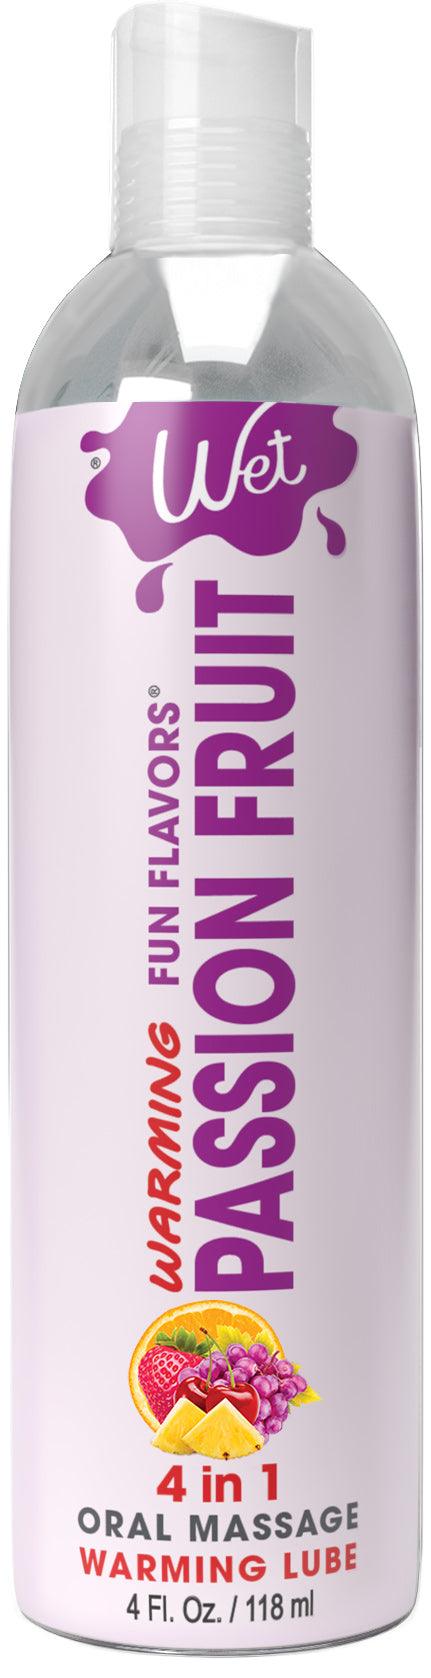 Wet Warming Fun Flavors - Passion Fruit - 4 in 1 Lubricant 4 Oz - My Sex Toy Hub